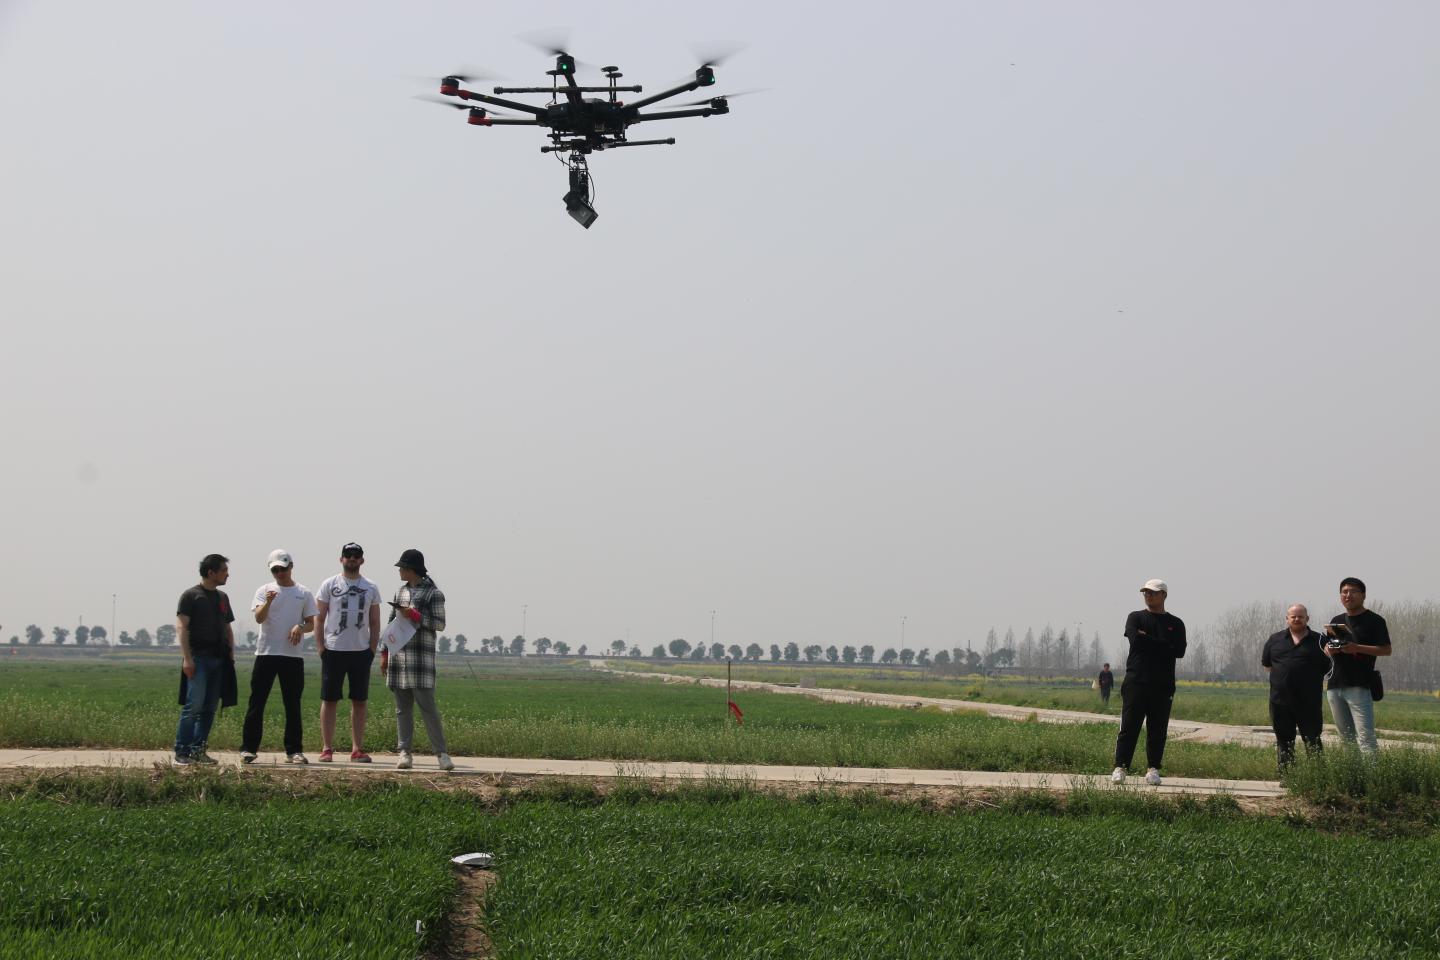 Newton Funding to Bolster China's Long-Term Growth and Global Economy with Agri-Tech Innovation